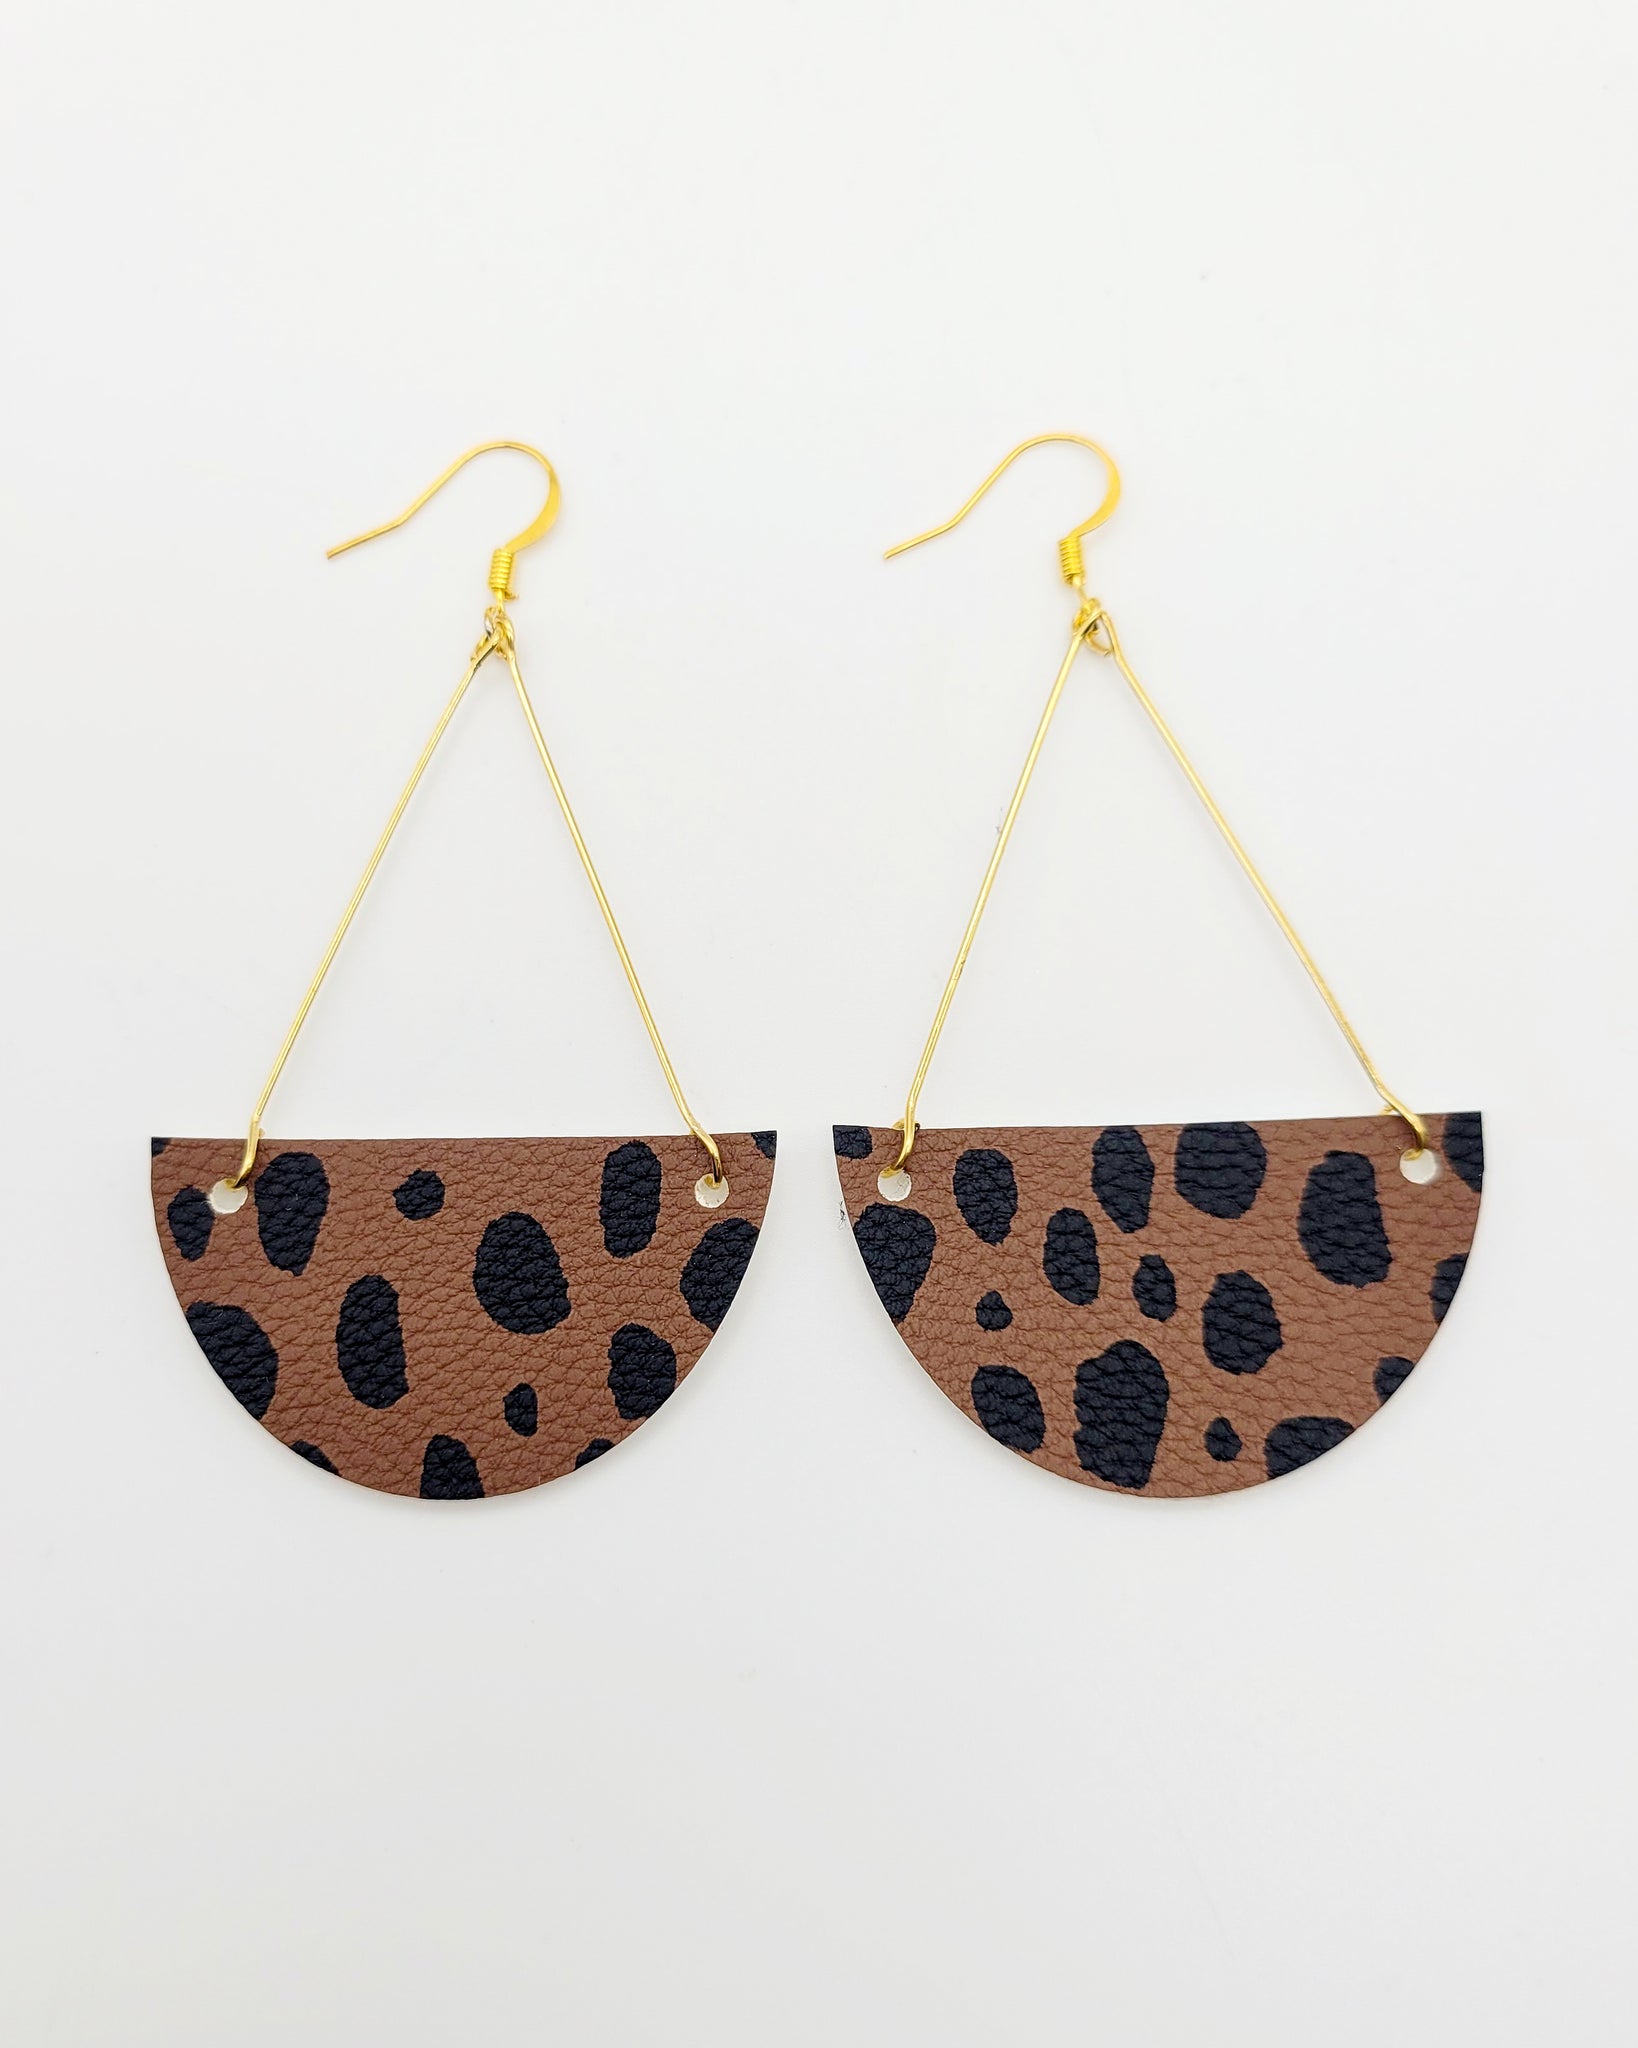 Brown and Black Spotted Triangle Drop Earrings